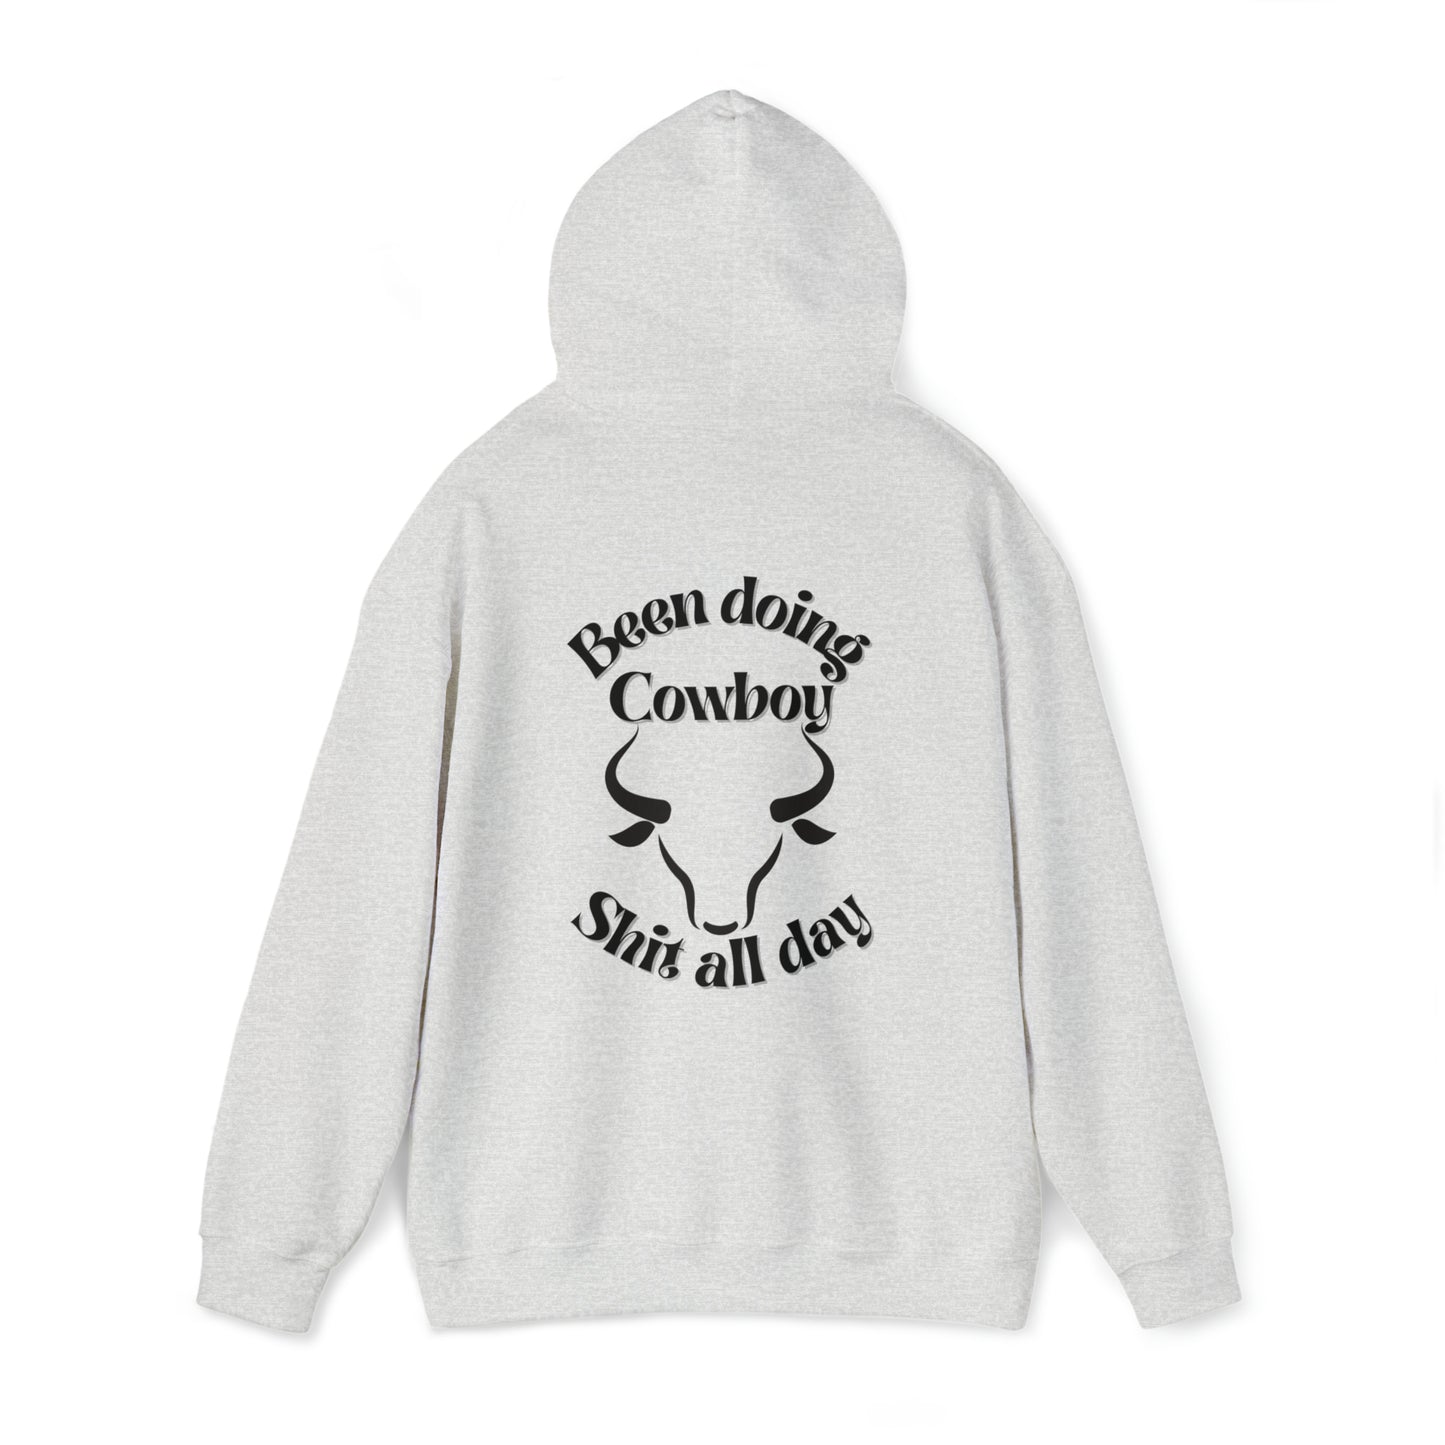 Been doing Cowboy shit all day hoodie